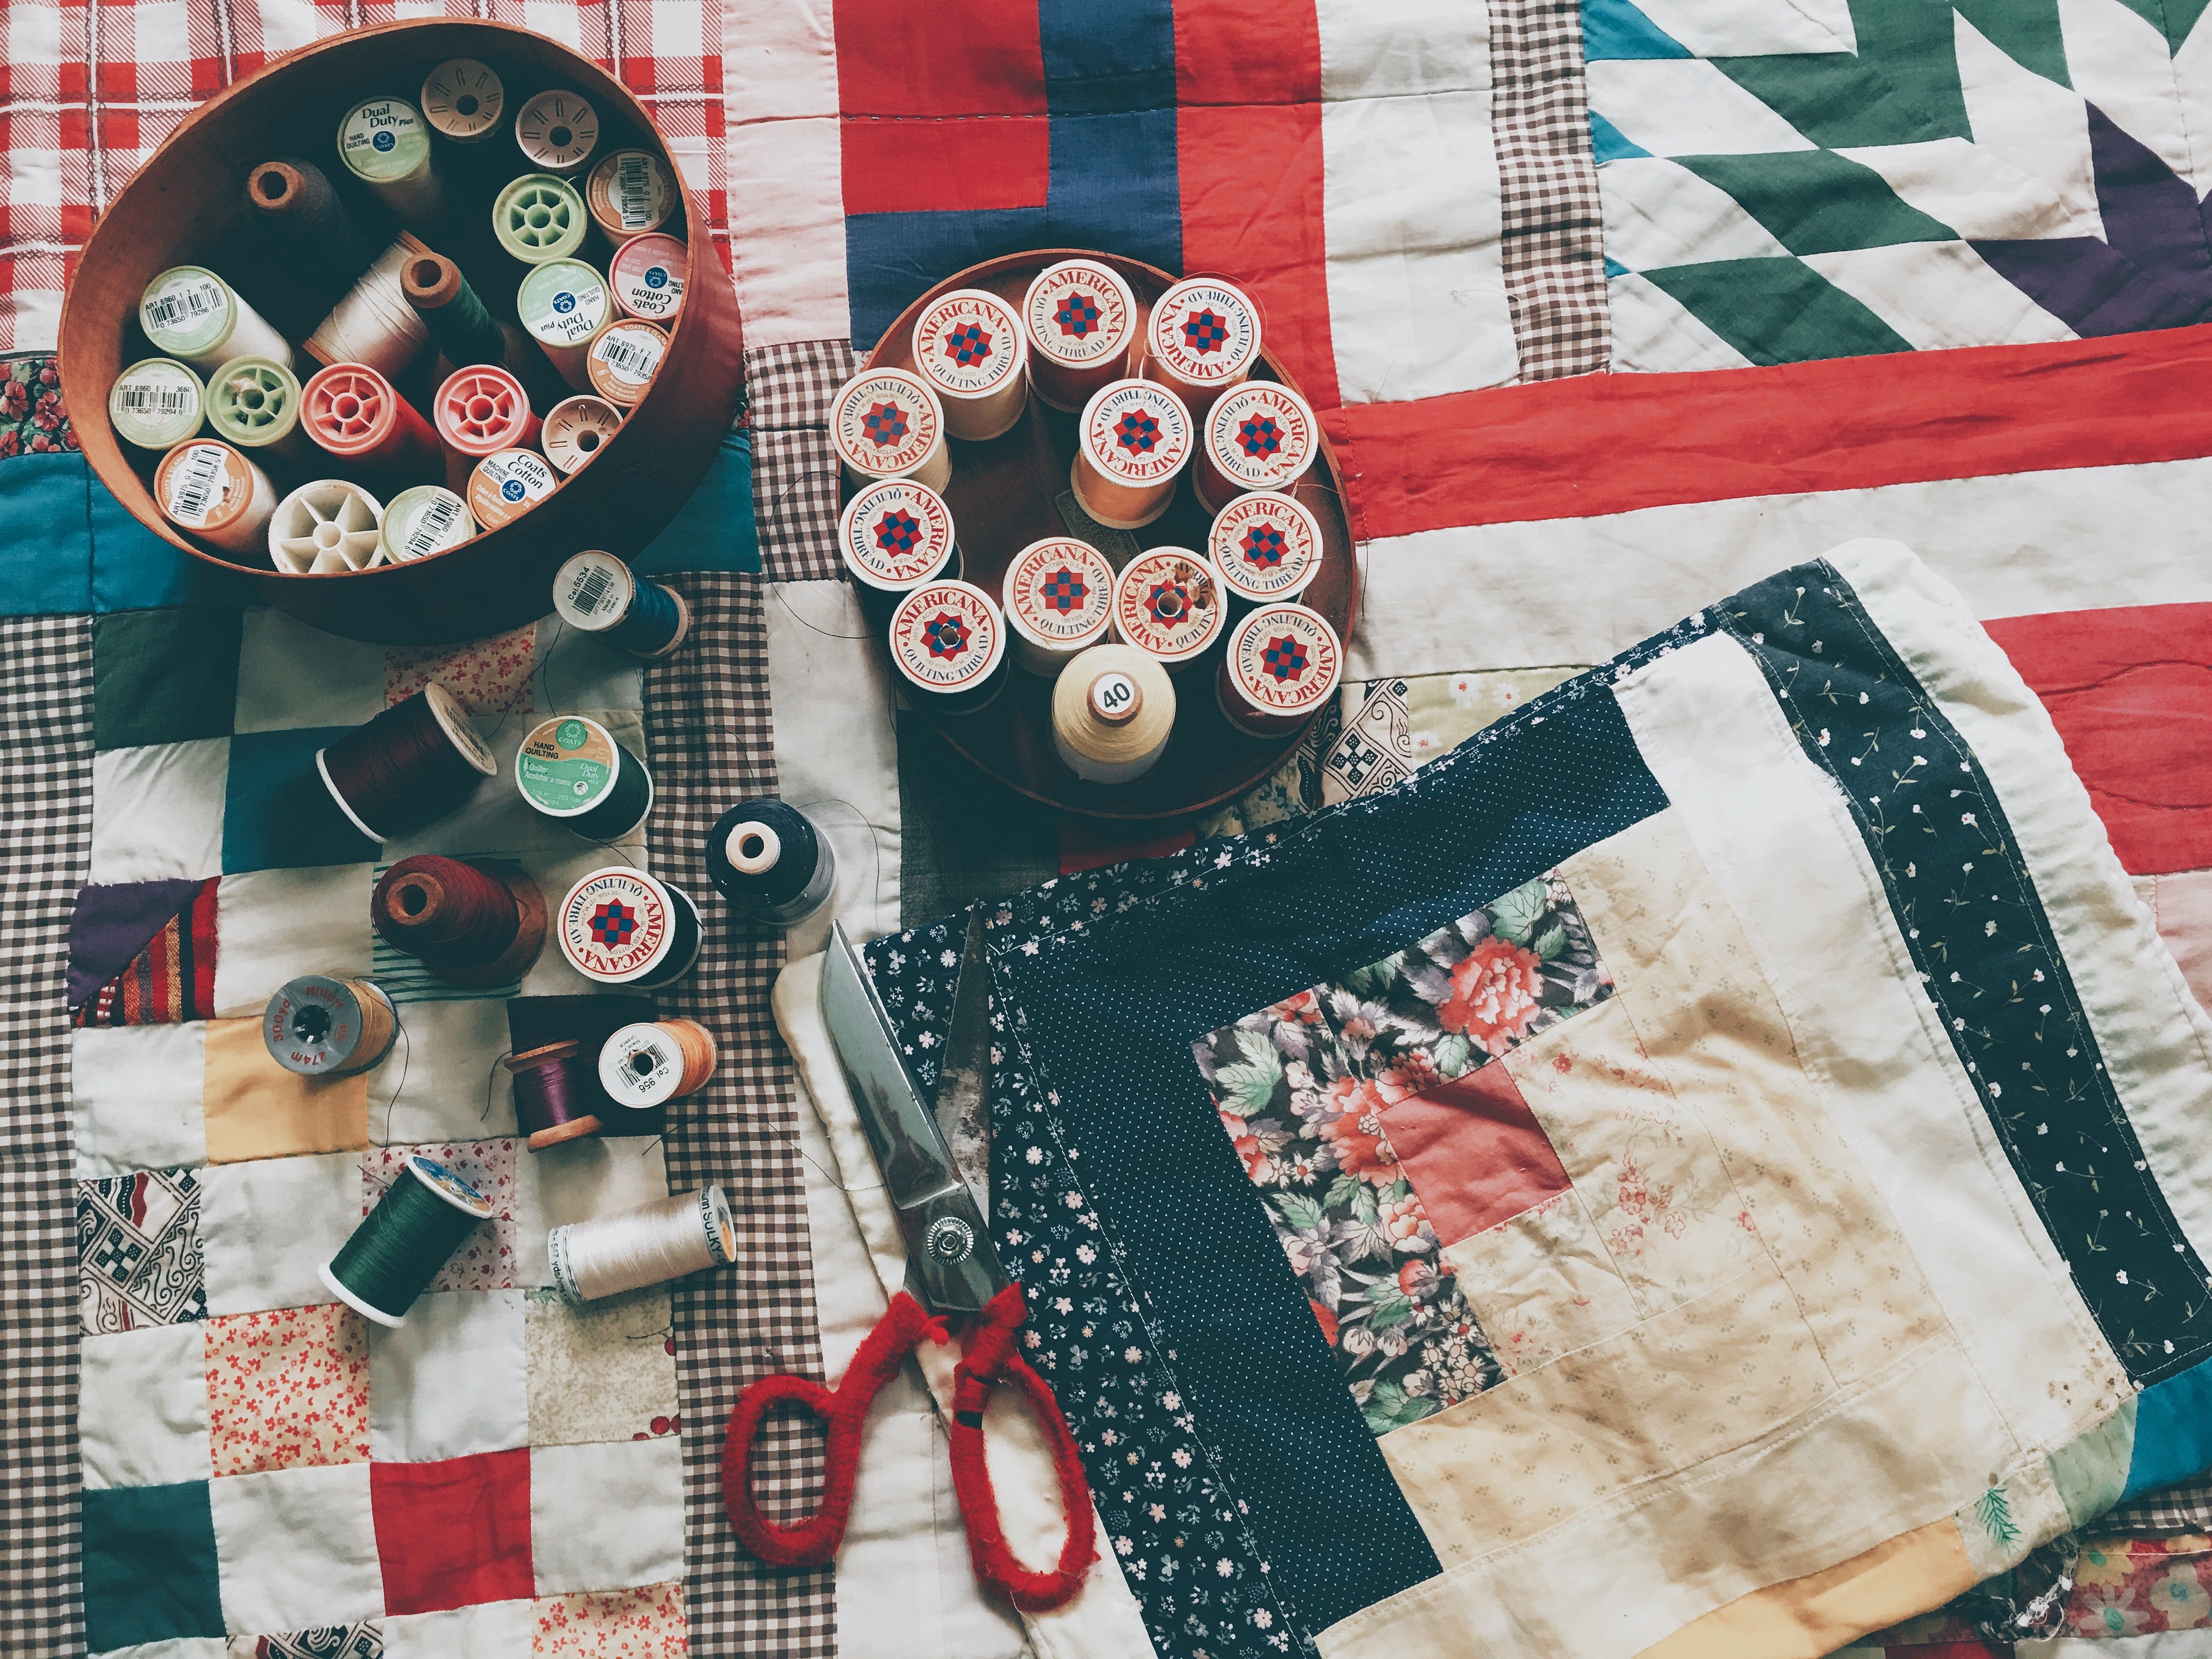 Mrs. Hill didn't sleep for nights, sewing a blanket for the homeless man | Photo: Unsplash